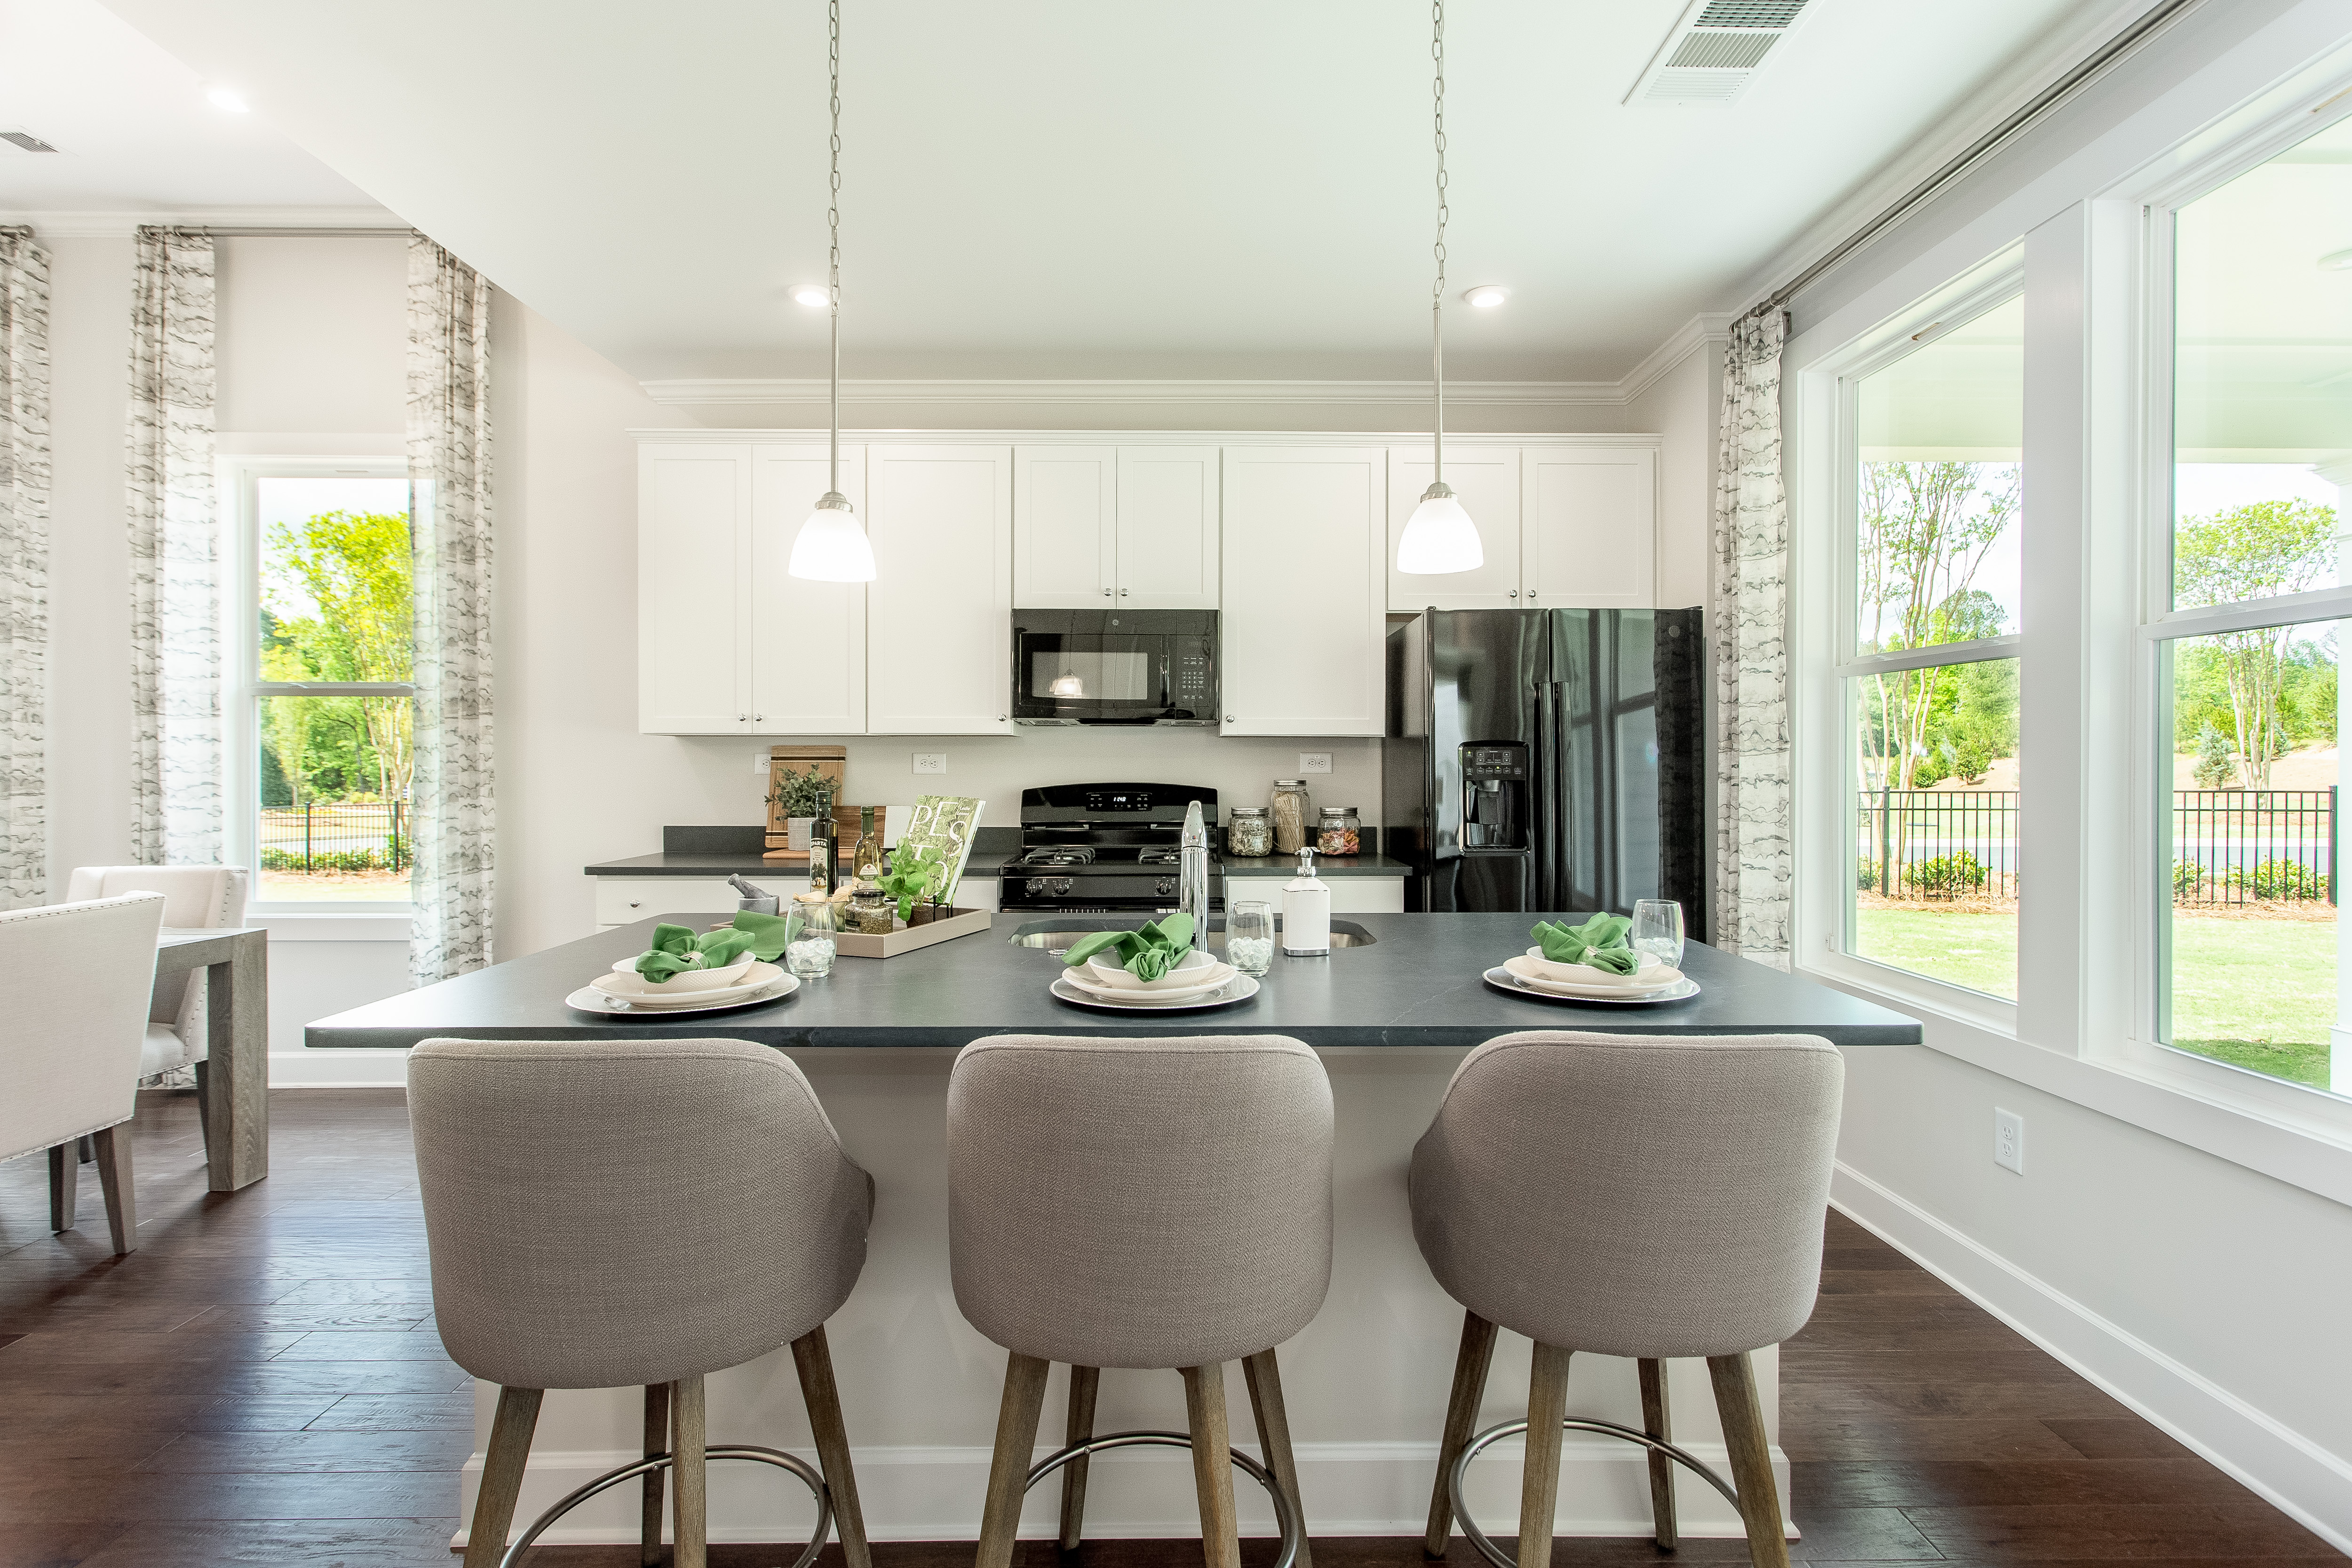 Kolter to Feature Four Decorated Models in 2020 Atlanta Parade of Homes